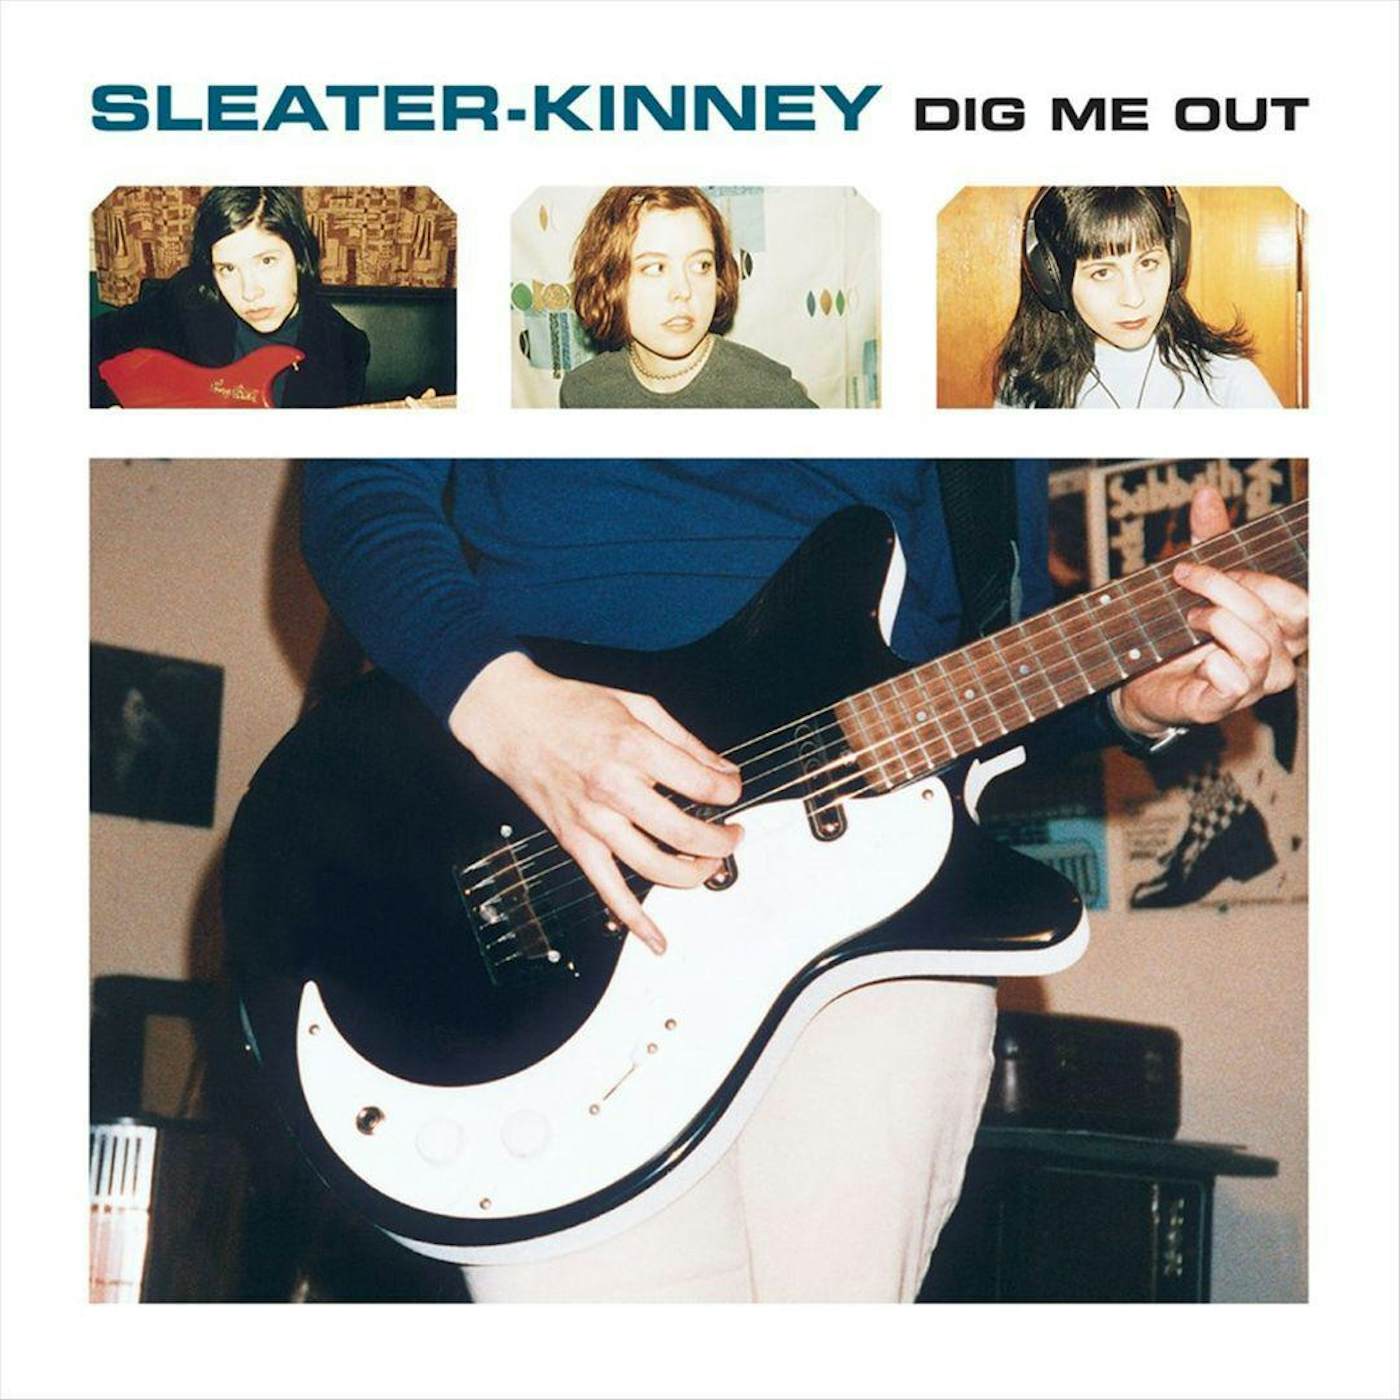 Sleater-Kinney Dig Me Out Vinyl Record